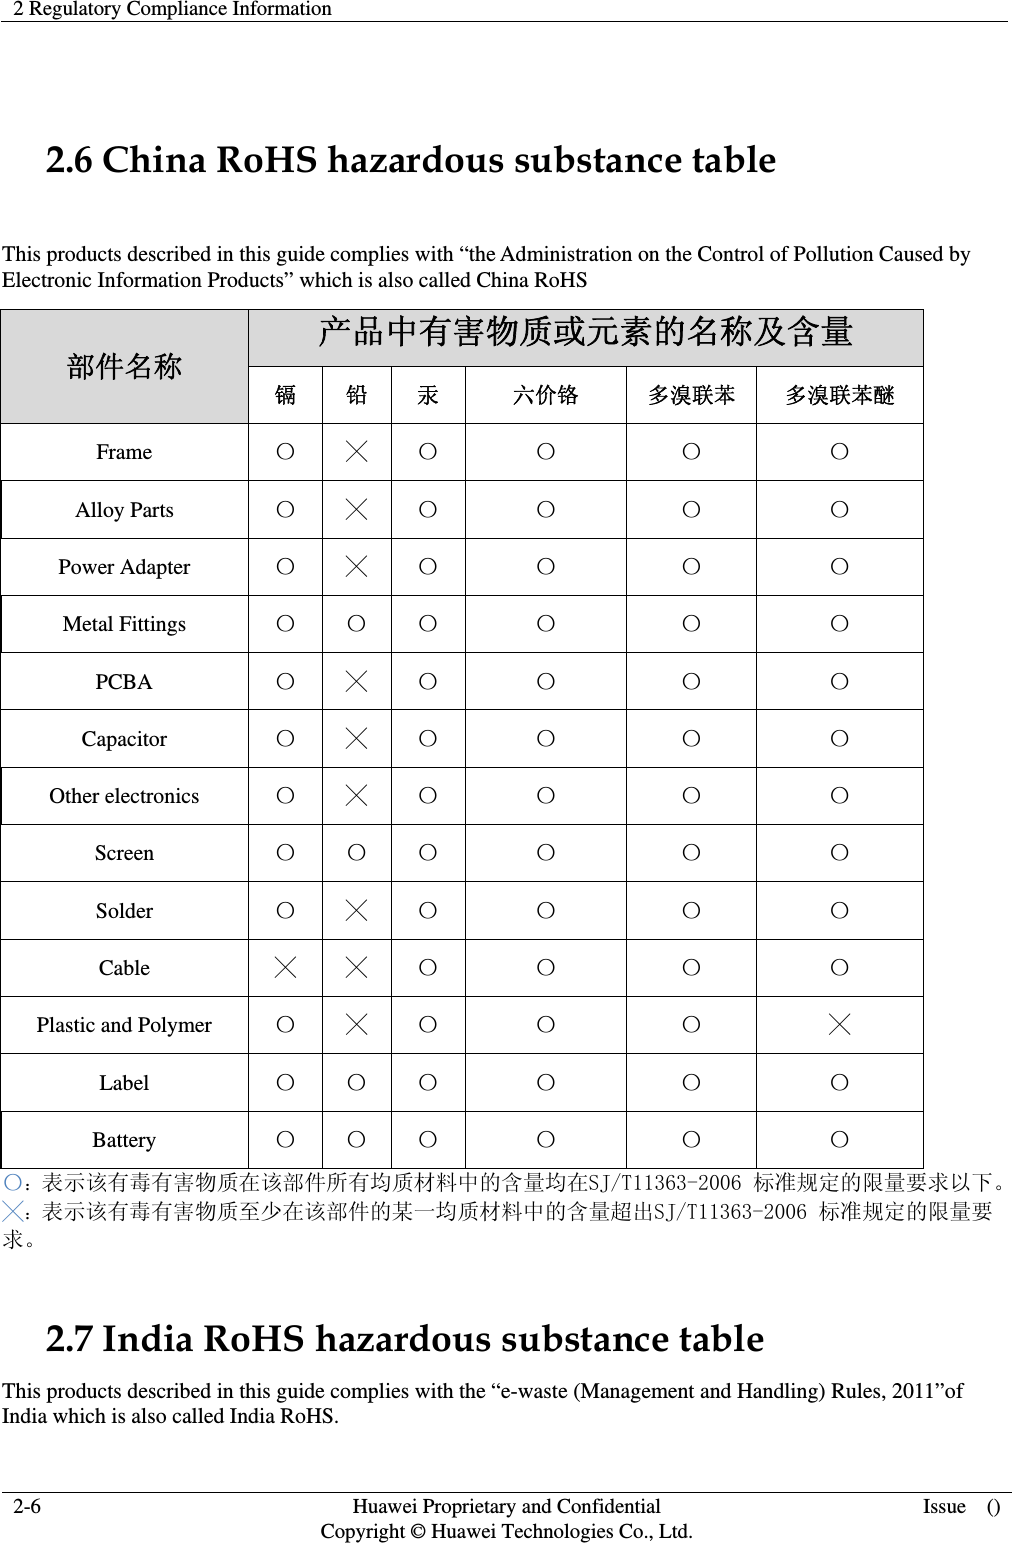 2 Regulatory Compliance Information   2-6  Huawei Proprietary and Confidential         Copyright © Huawei Technologies Co., Ltd. Issue  ()  2.6 China RoHS hazardous substance table  This products described in this guide complies with “the Administration on the Control of Pollution Caused by Electronic Information Products” which is also called China RoHS 部件名称 产品中有害物质或元素的名称及含量 镉 铅 汞 六价铬 多溴联苯 多溴联苯醚 Frame  〇 ╳ 〇 〇 〇 〇 Alloy Parts  〇 ╳ 〇 〇 〇 〇 Power Adapter  〇 ╳ 〇 〇 〇 〇 Metal Fittings  〇 〇 〇 〇 〇 〇 PCBA  〇 ╳ 〇 〇 〇 〇 Capacitor  〇 ╳ 〇 〇 〇 〇 Other electronics  〇 ╳ 〇 〇 〇 〇 Screen  〇 〇 〇 〇 〇 〇 Solder  〇 ╳ 〇 〇 〇 〇 Cable  ╳ ╳ 〇 〇 〇 〇 Plastic and Polymer  〇 ╳ 〇 〇 〇 ╳ Label  〇 〇 〇 〇 〇 〇 Battery  〇 〇 〇 〇 〇 〇 〇：表示该有毒有害物质在该部件所有均质材料中的含量均在SJ/T11363-2006 标准规定的限量要求以下。 ╳：表示该有毒有害物质至少在该部件的某一均质材料中的含量超出SJ/T11363-2006 标准规定的限量要求。 2.7 India RoHS hazardous substance table This products described in this guide complies with the “e-waste (Management and Handling) Rules, 2011”of India which is also called India RoHS. 